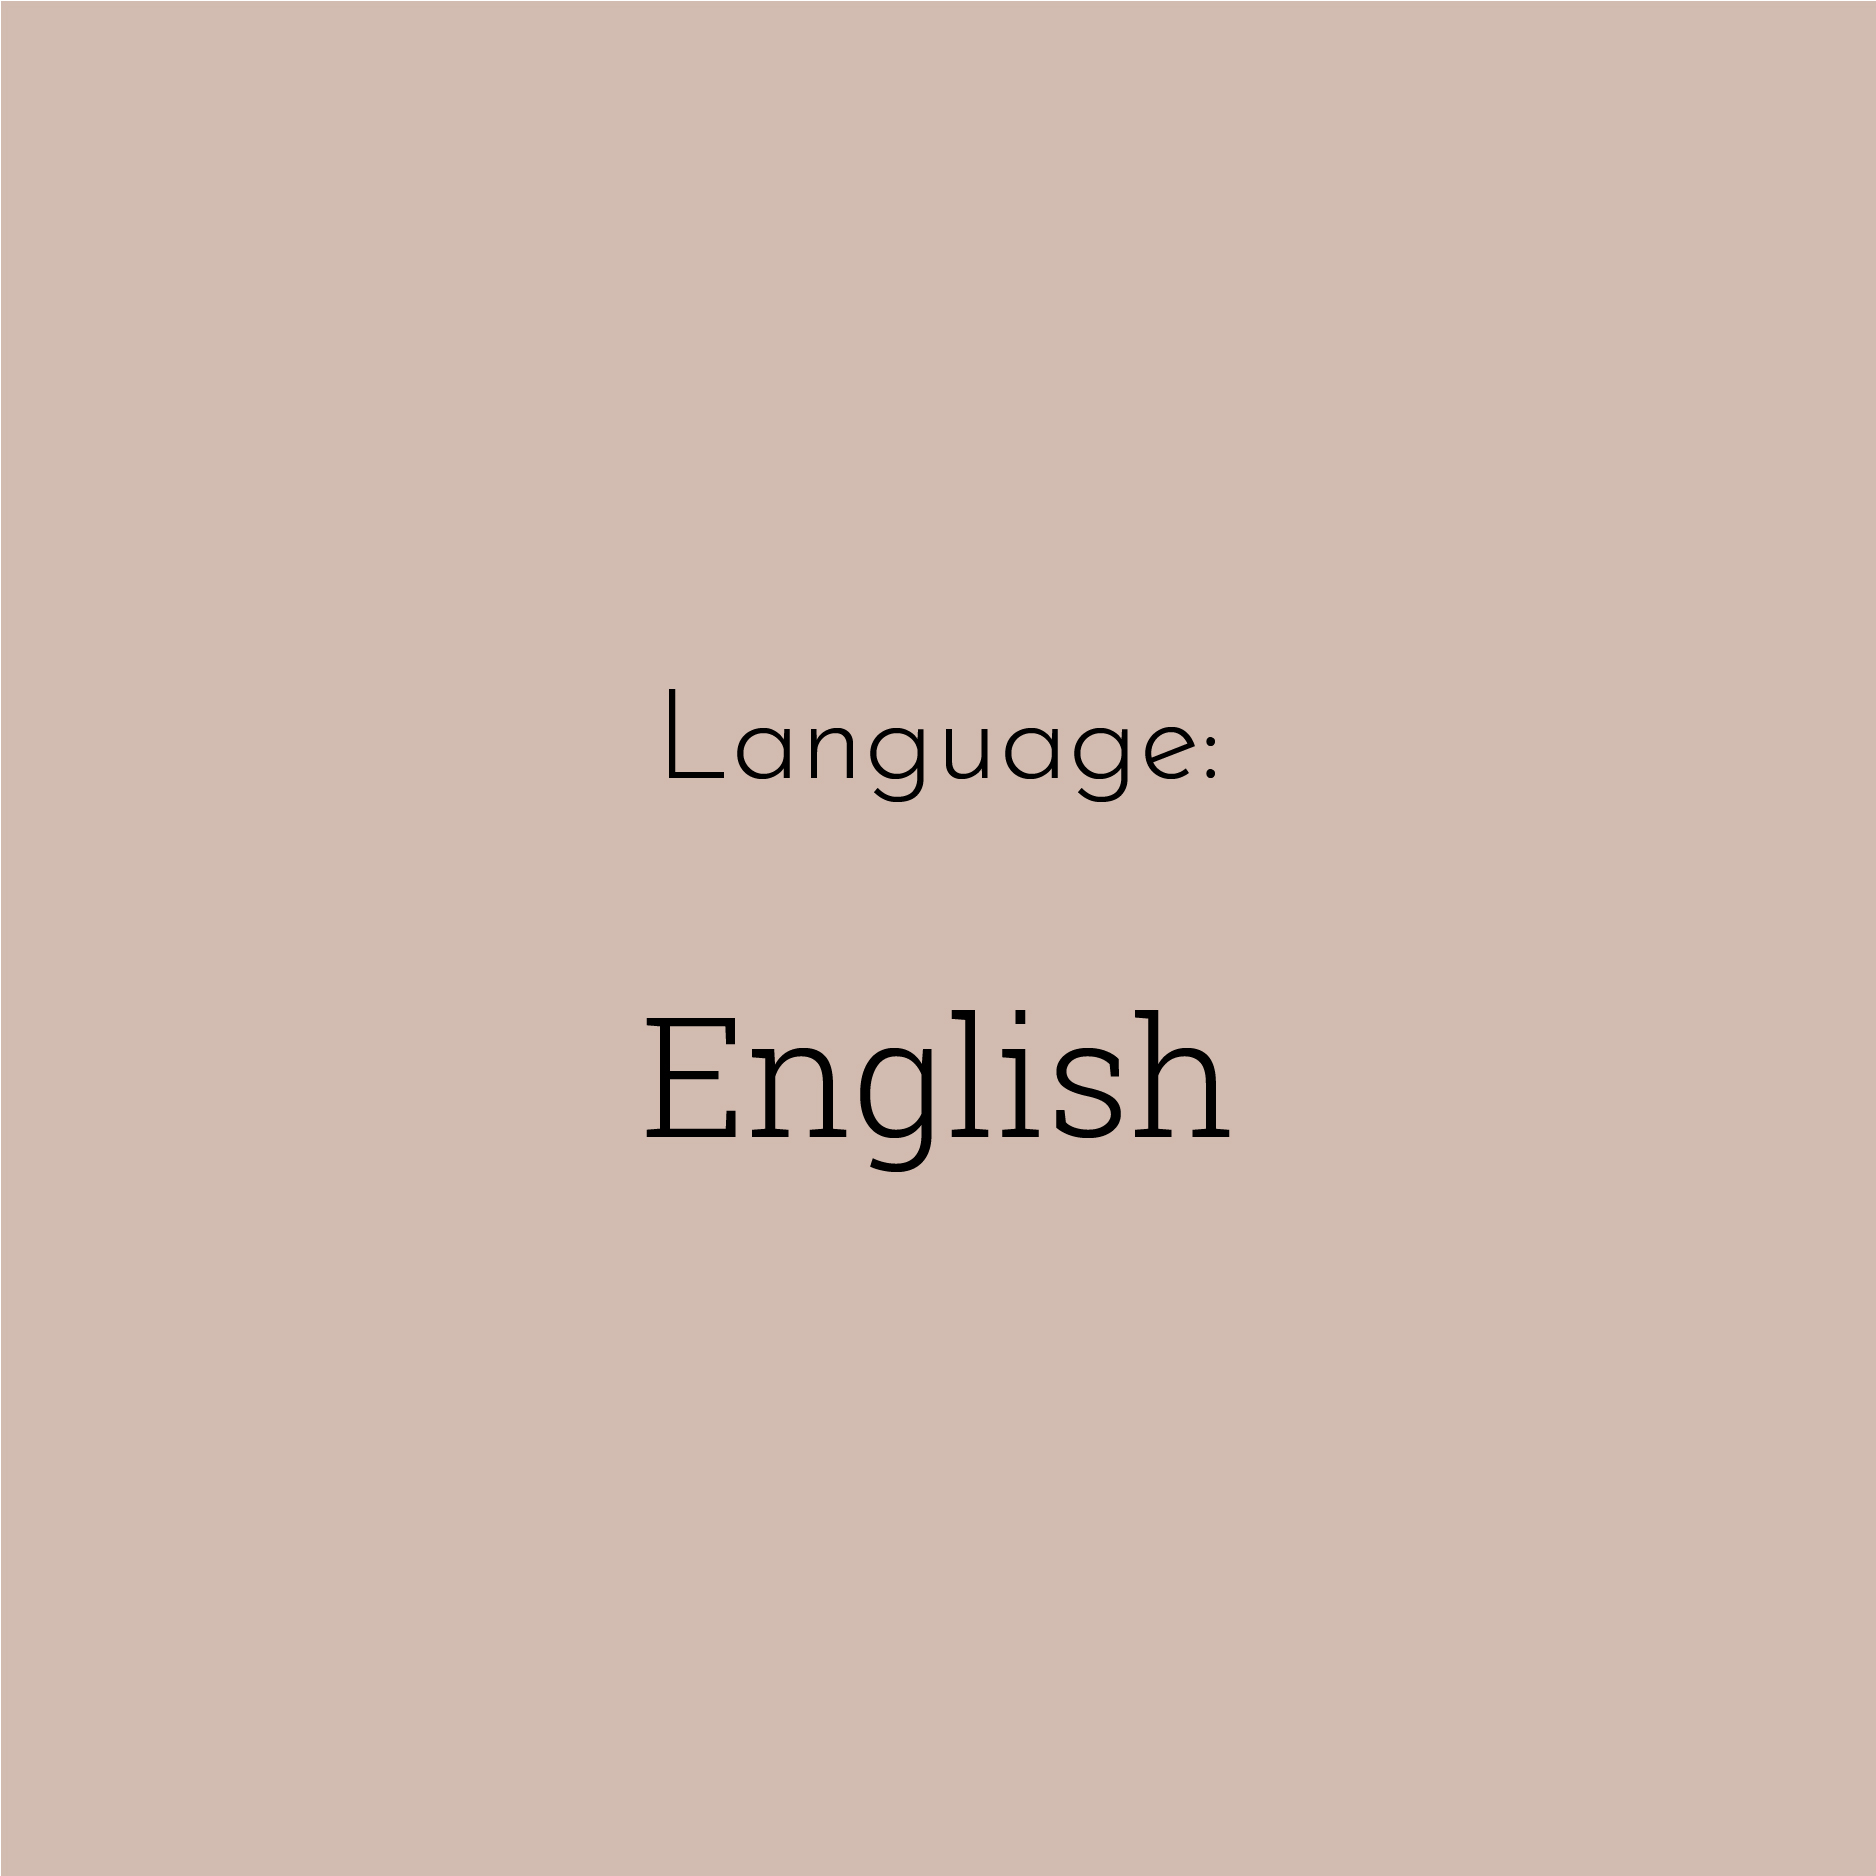 A solid brown block contains the text “Language: English”